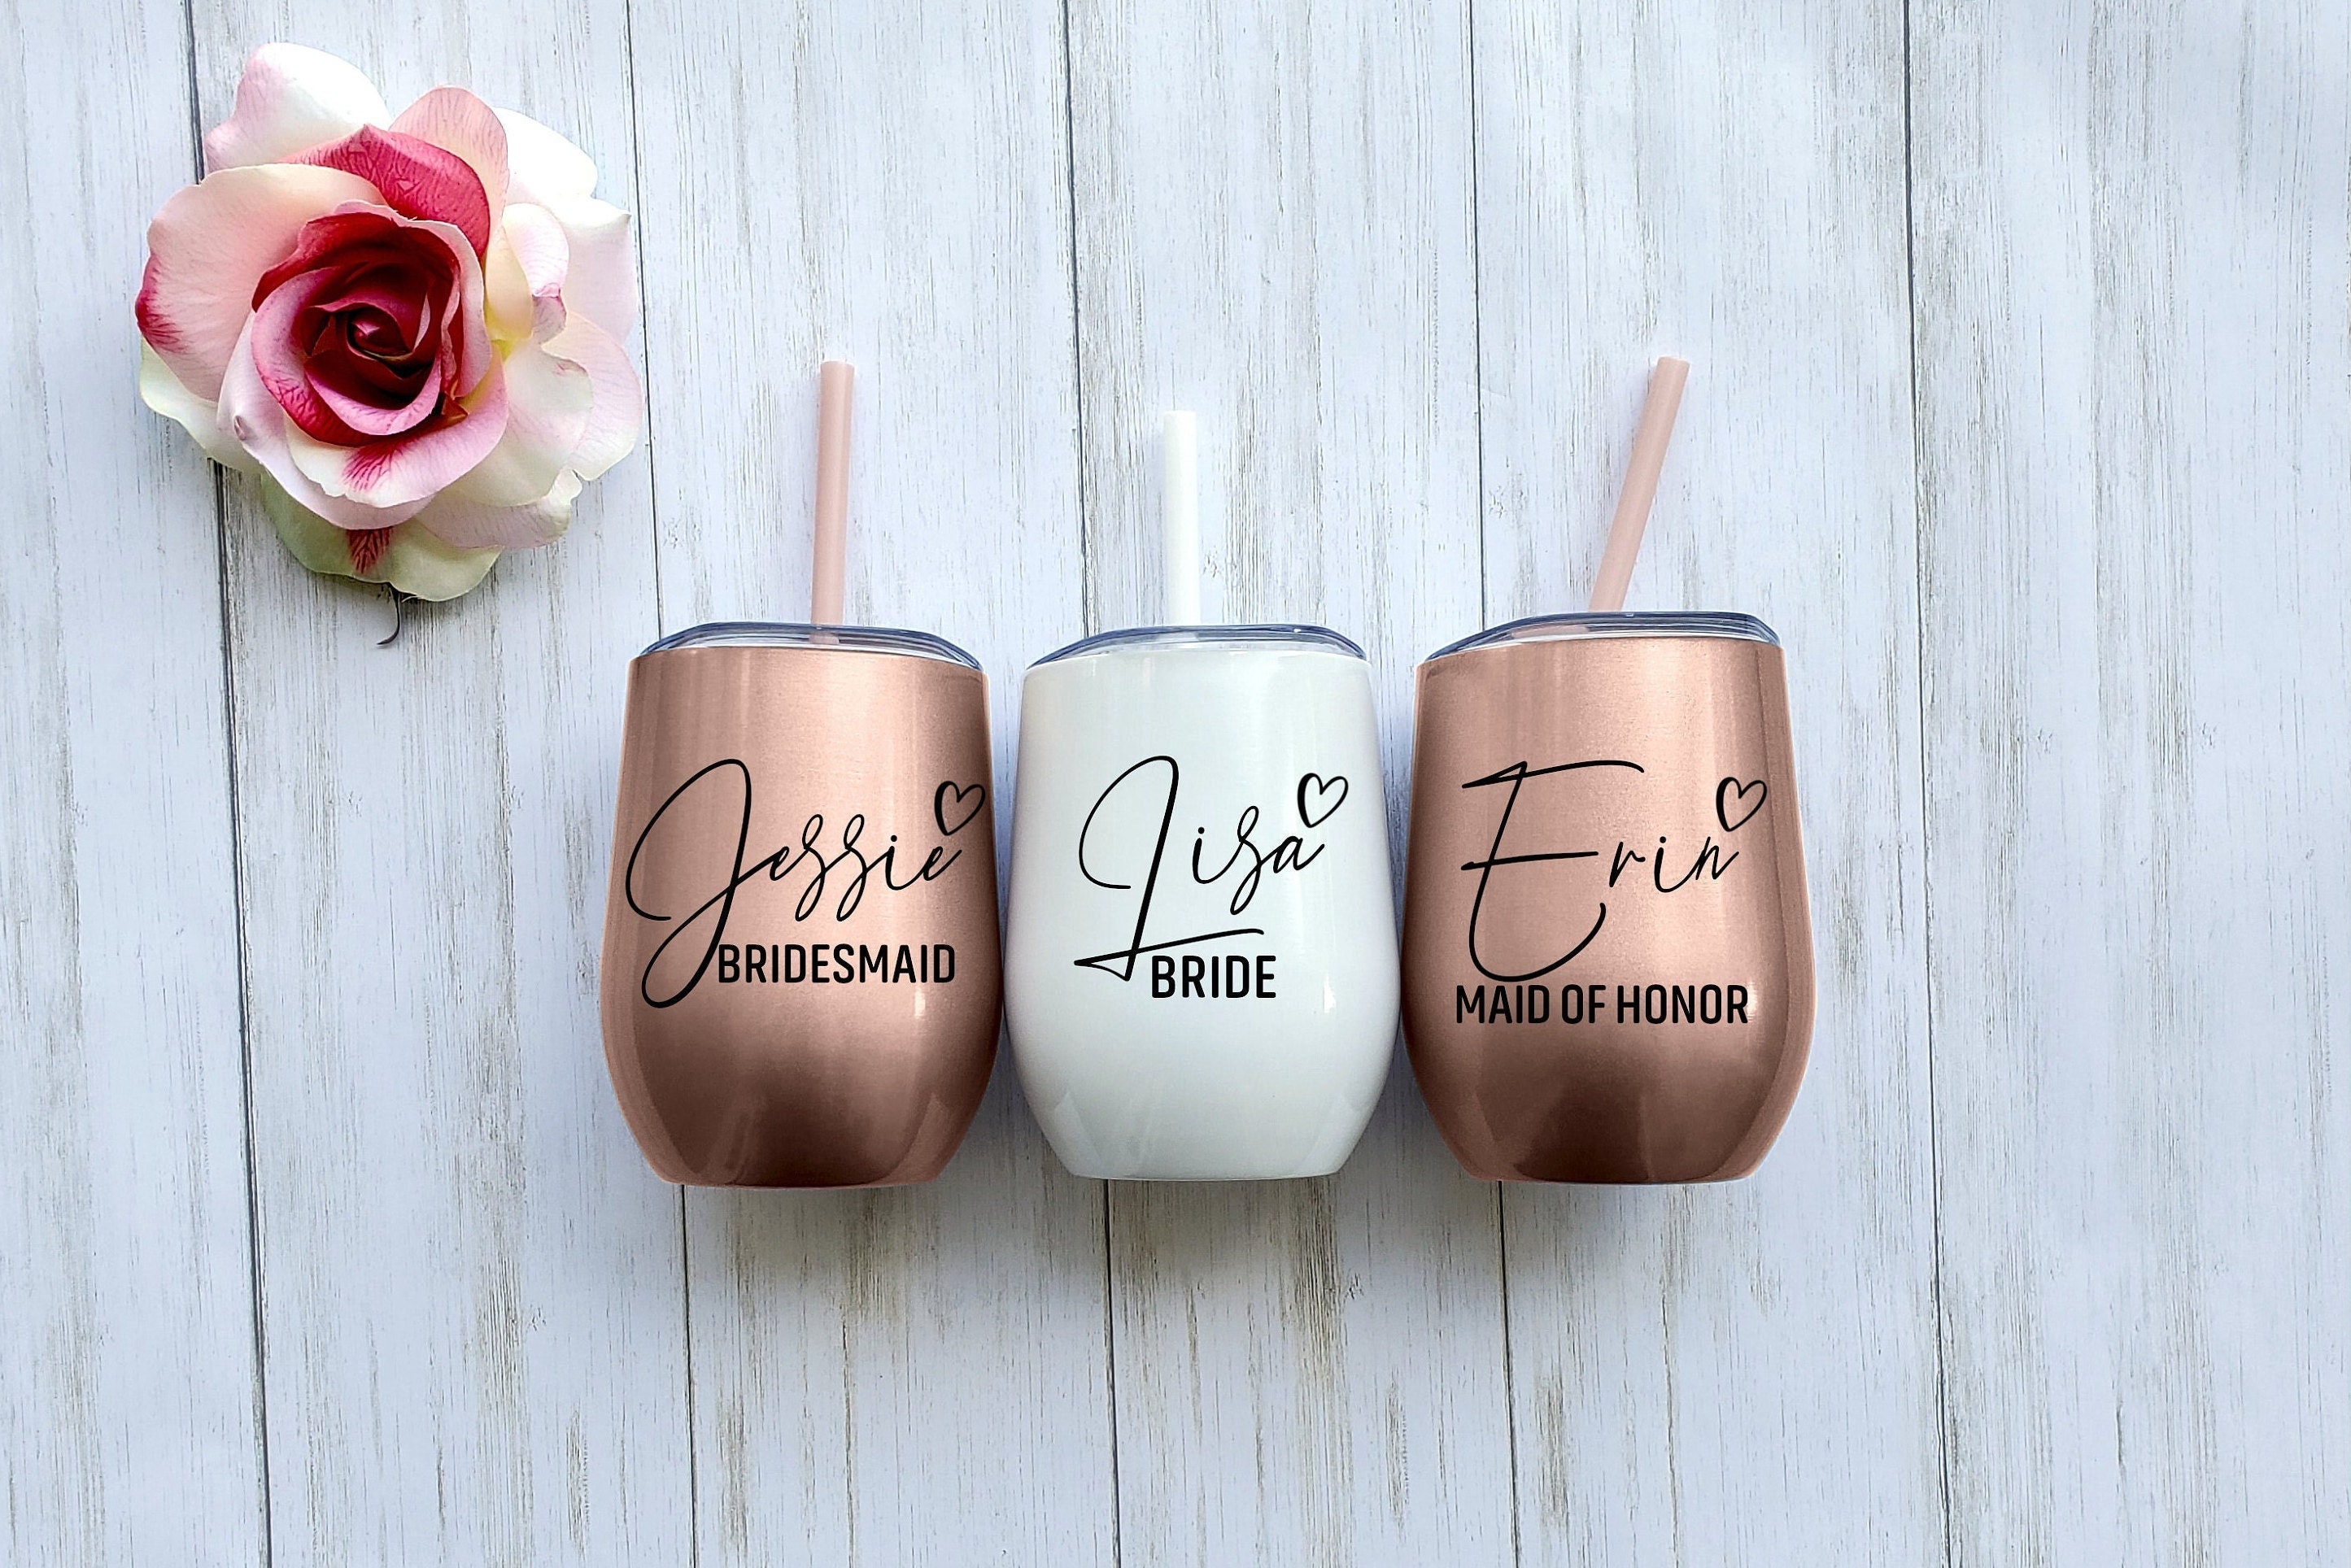 Bachelorette Tumblers with Straw Bridesmaid Gift Bridesmaid Proposal Bachelorette Tumblers Personalized Stainless Steel Tumbler set of 34567